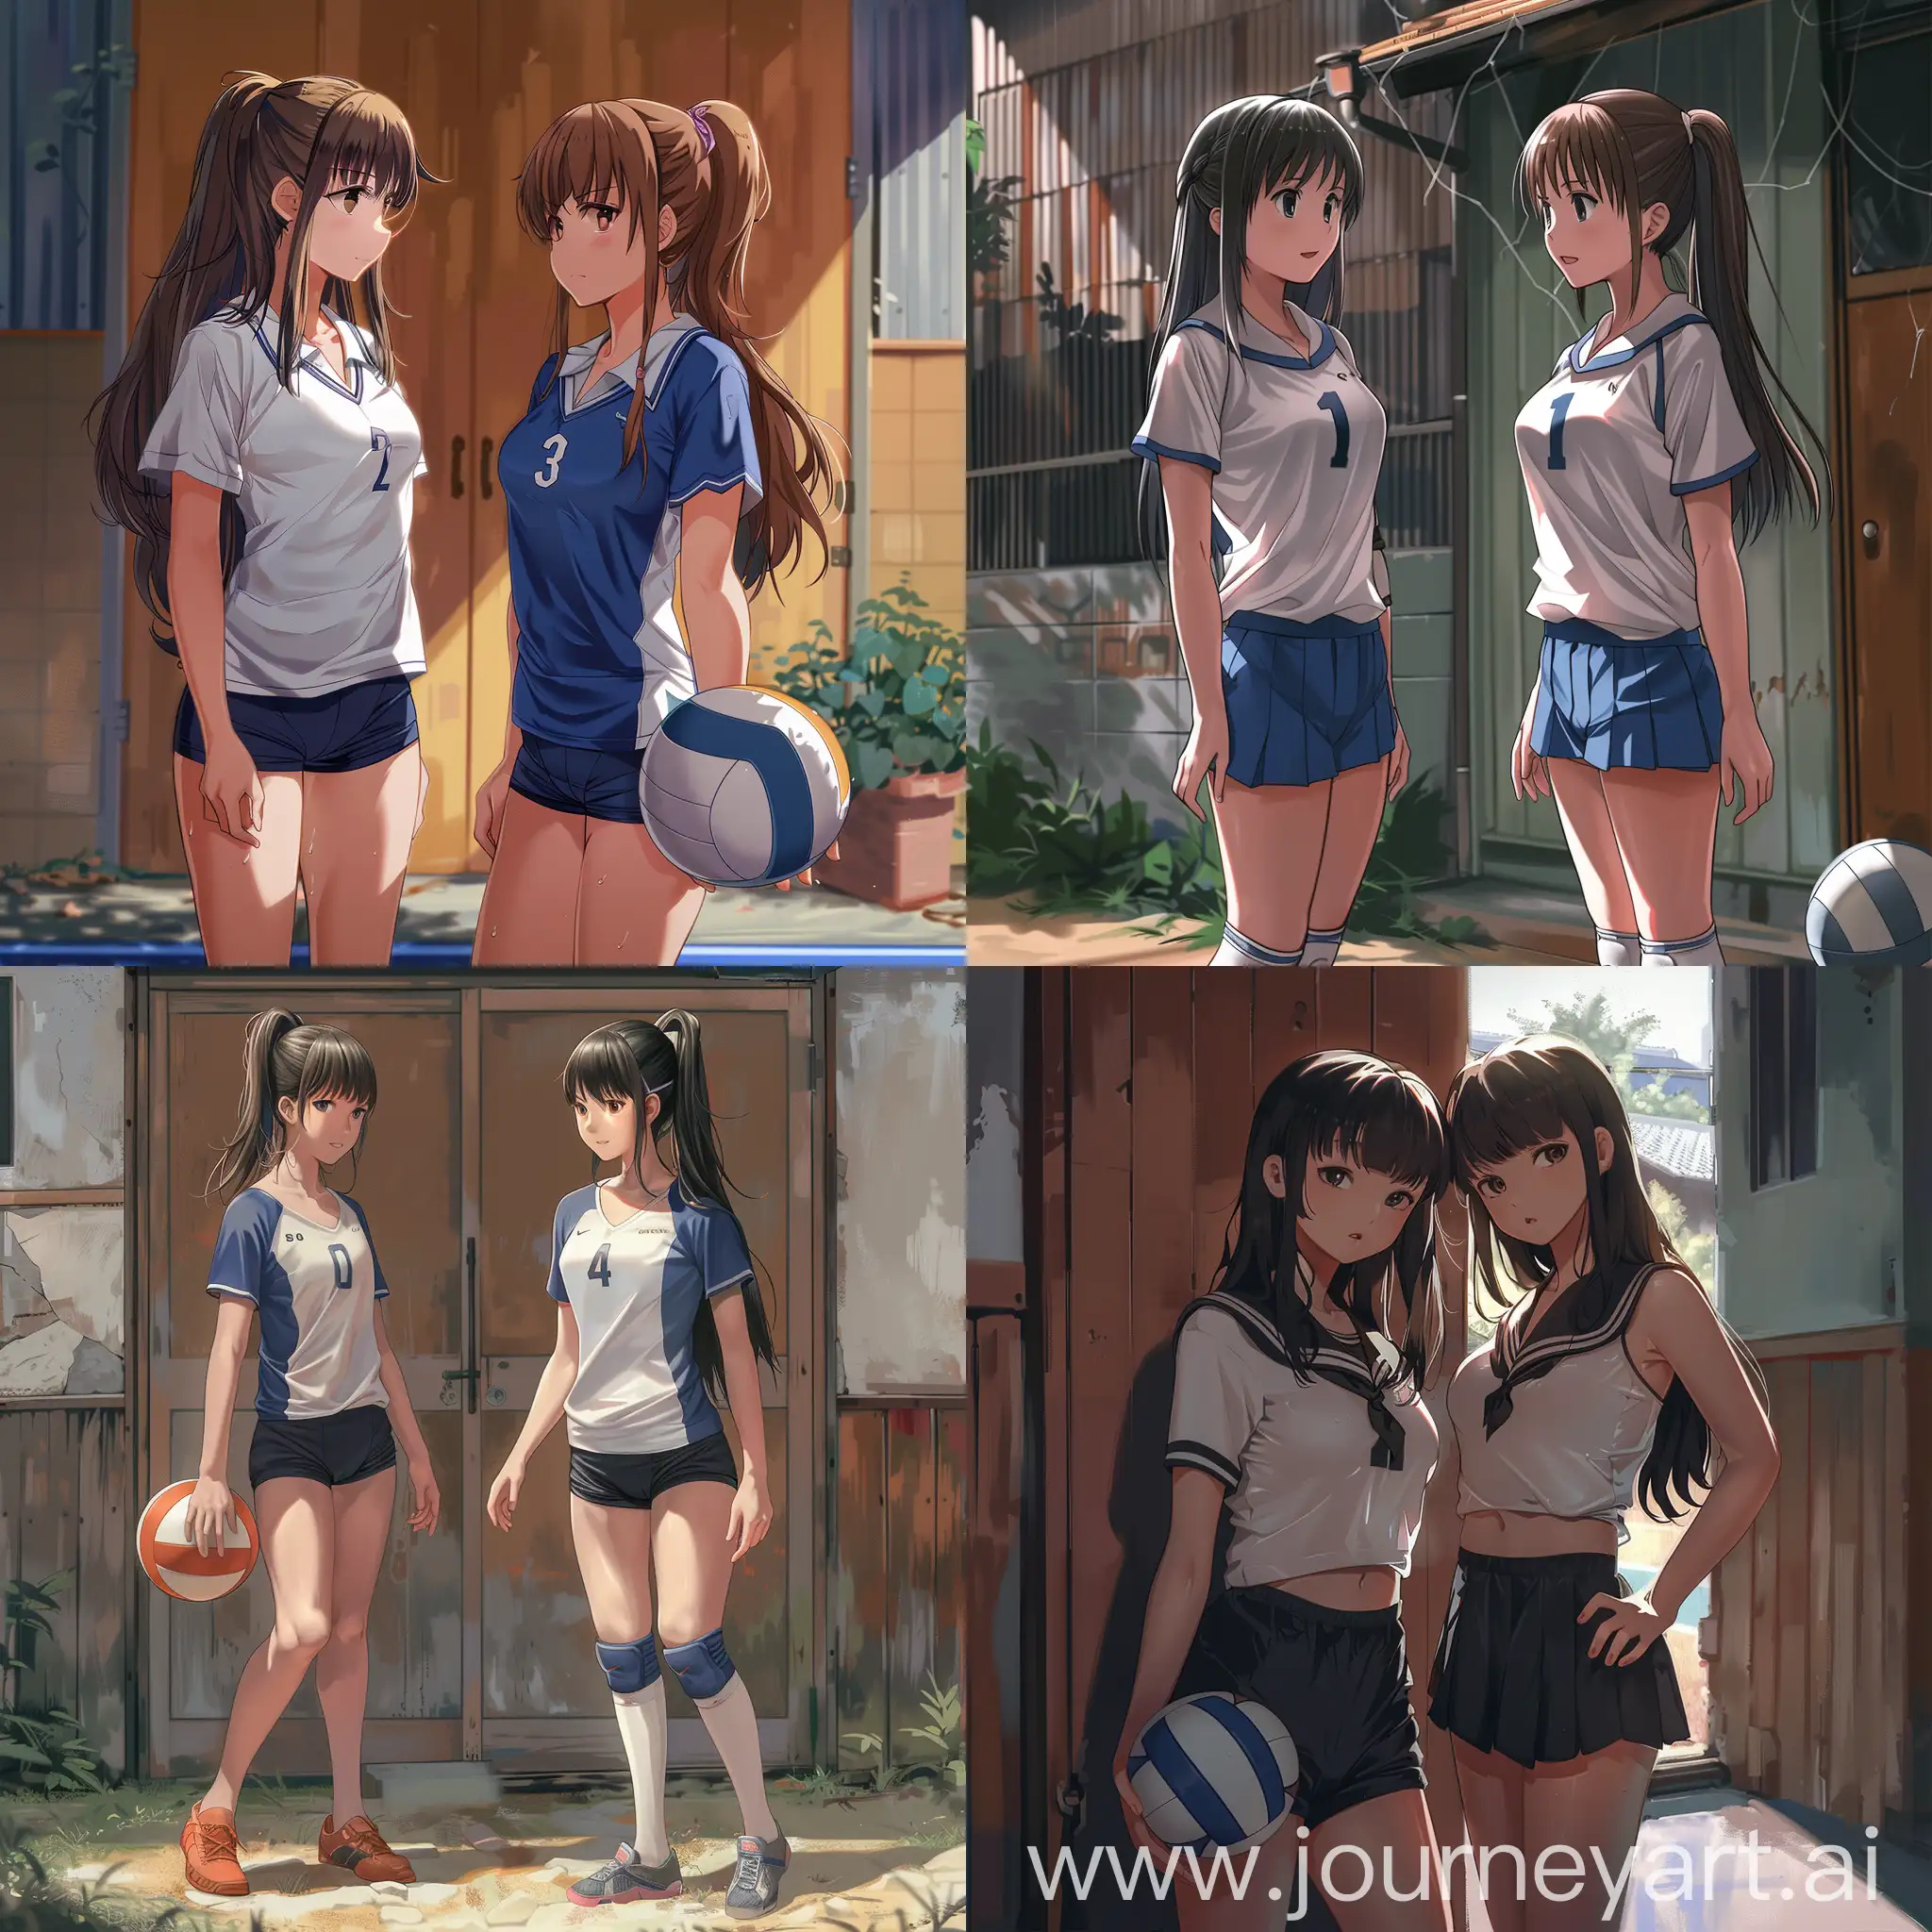 Two-Beautiful-Japanese-Girls-in-School-Uniforms-Standing-Together-by-Small-Brown-Door